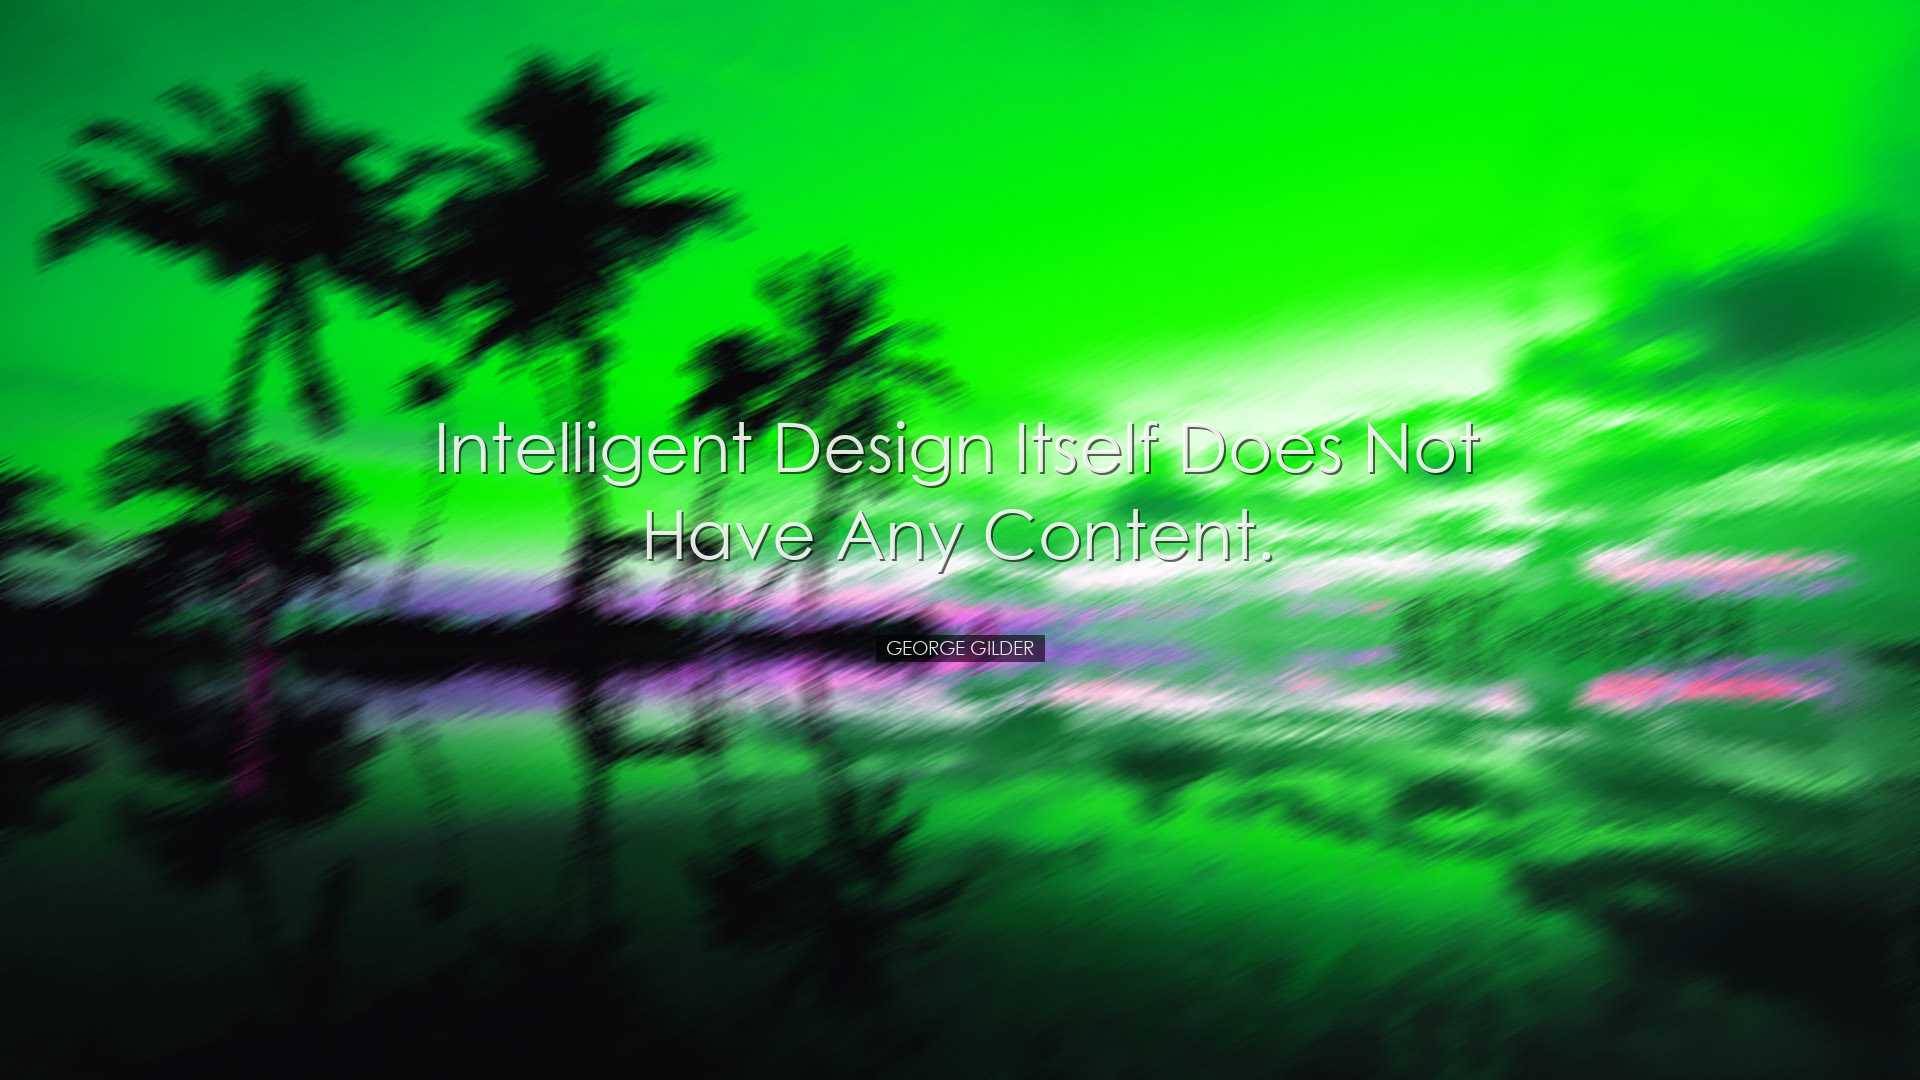 Intelligent design itself does not have any content. - George Gild